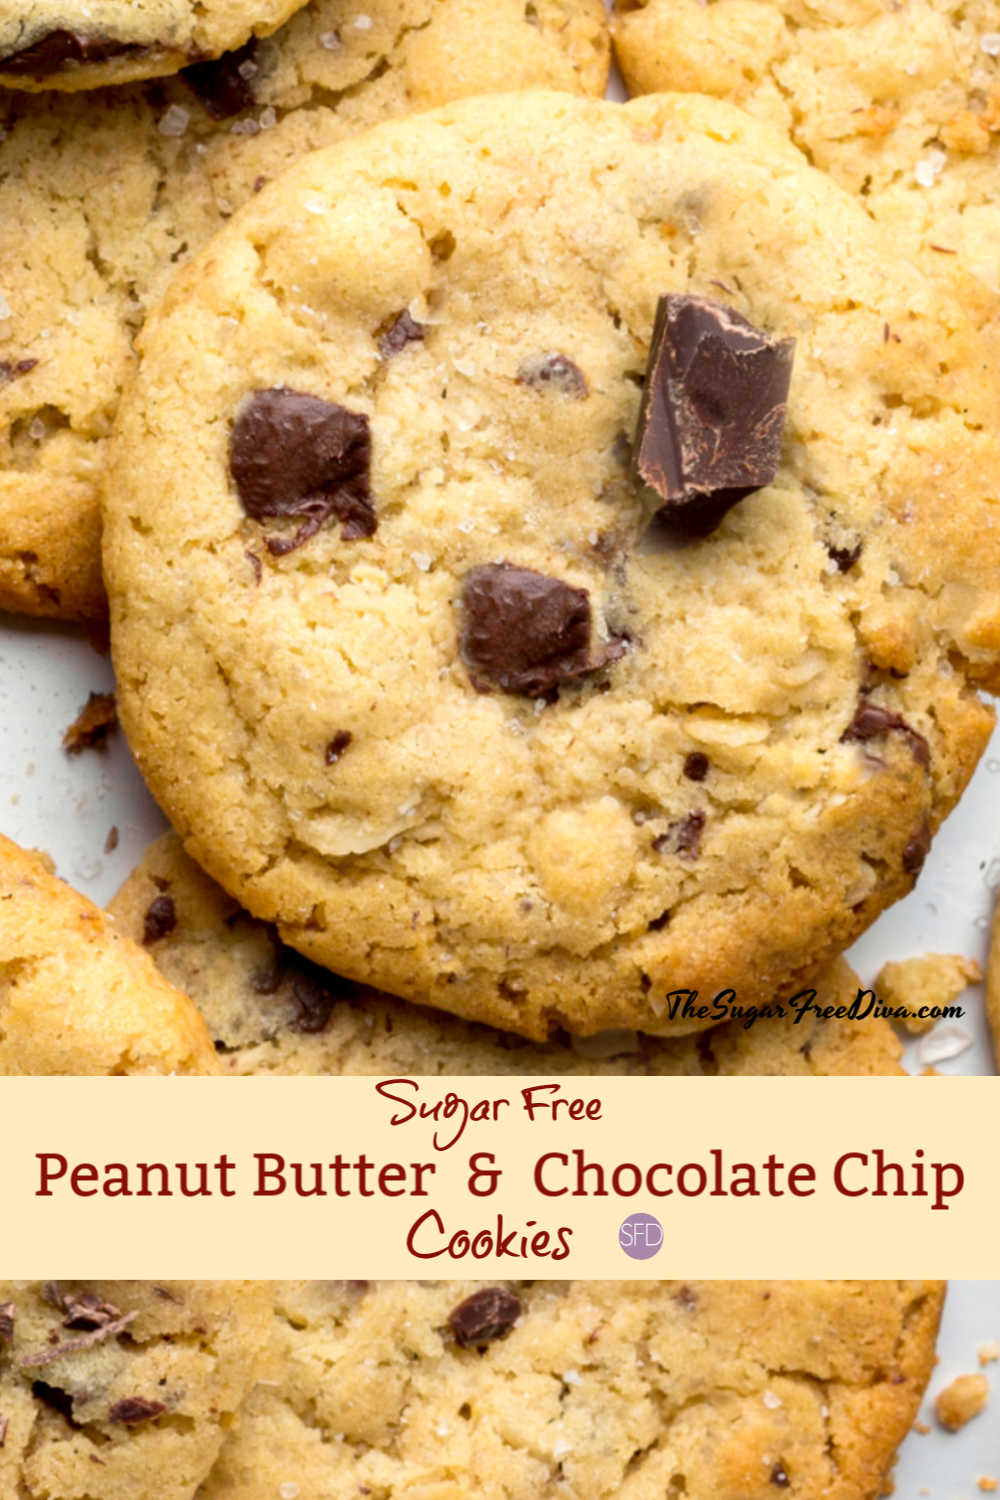 Sugar Free Peanut Butter Chocolate Chip Cookies